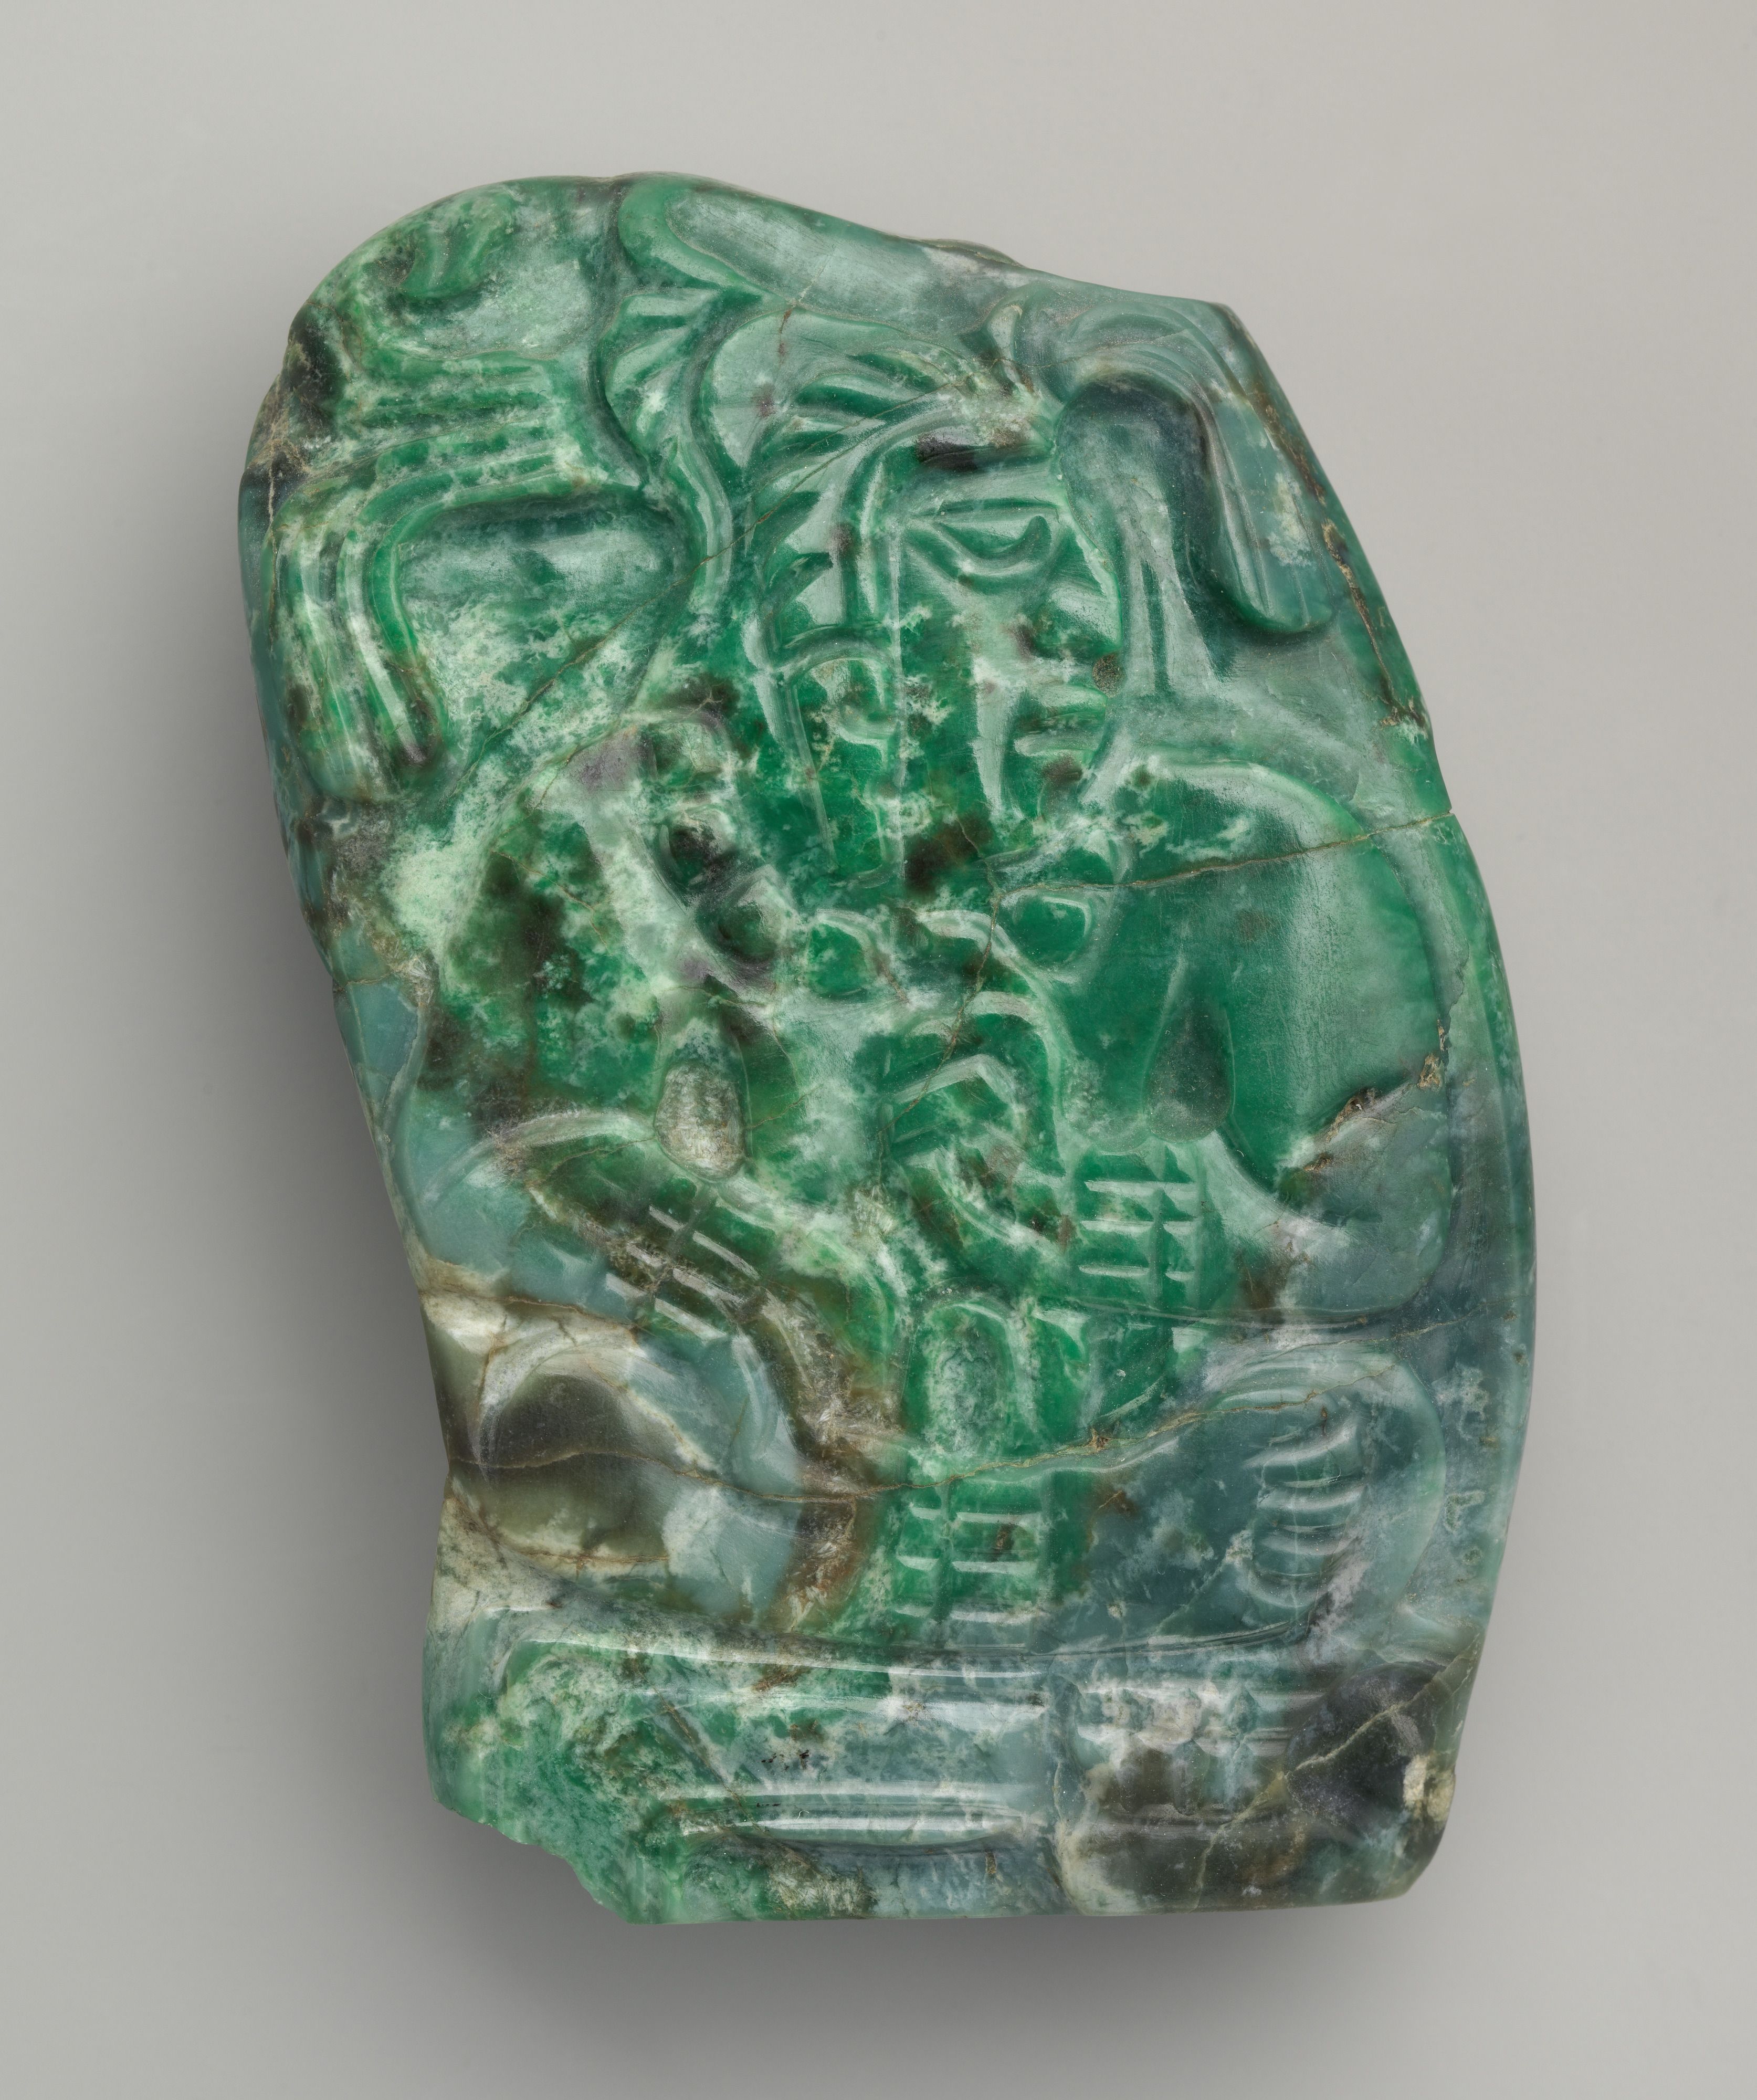 A small jade pendant featuring a lord seated crosslegged on a dais. The figure turns his head to his left and wears a feathered headdress. He wears a necklace, bracelets, and anklets. His left hand is raised to his chest.